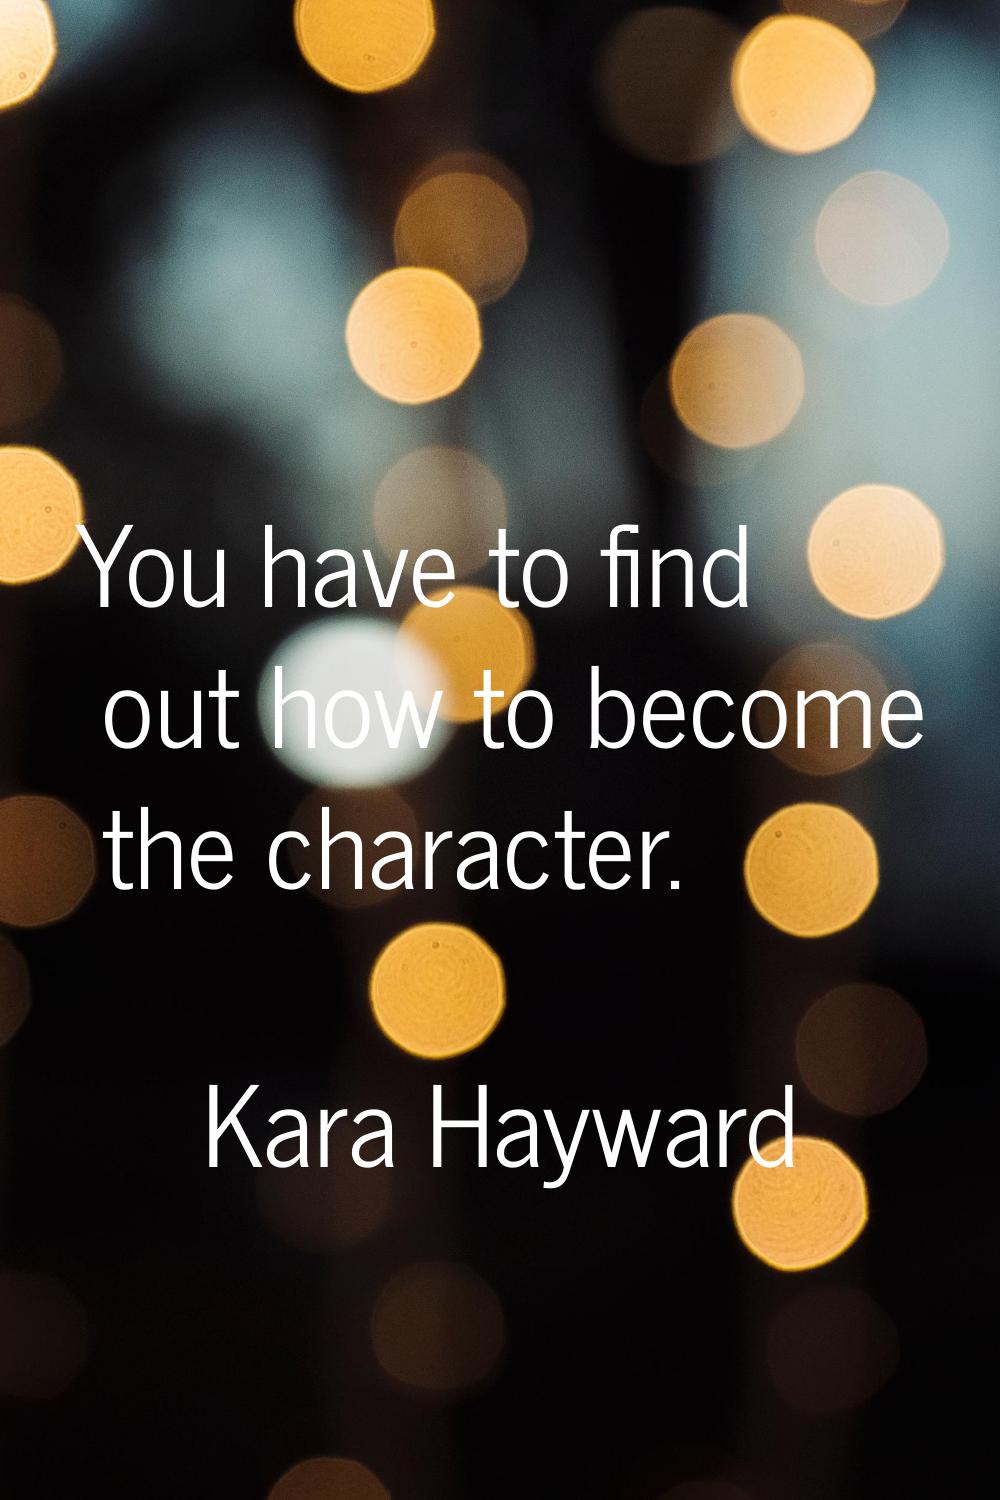 You have to find out how to become the character.